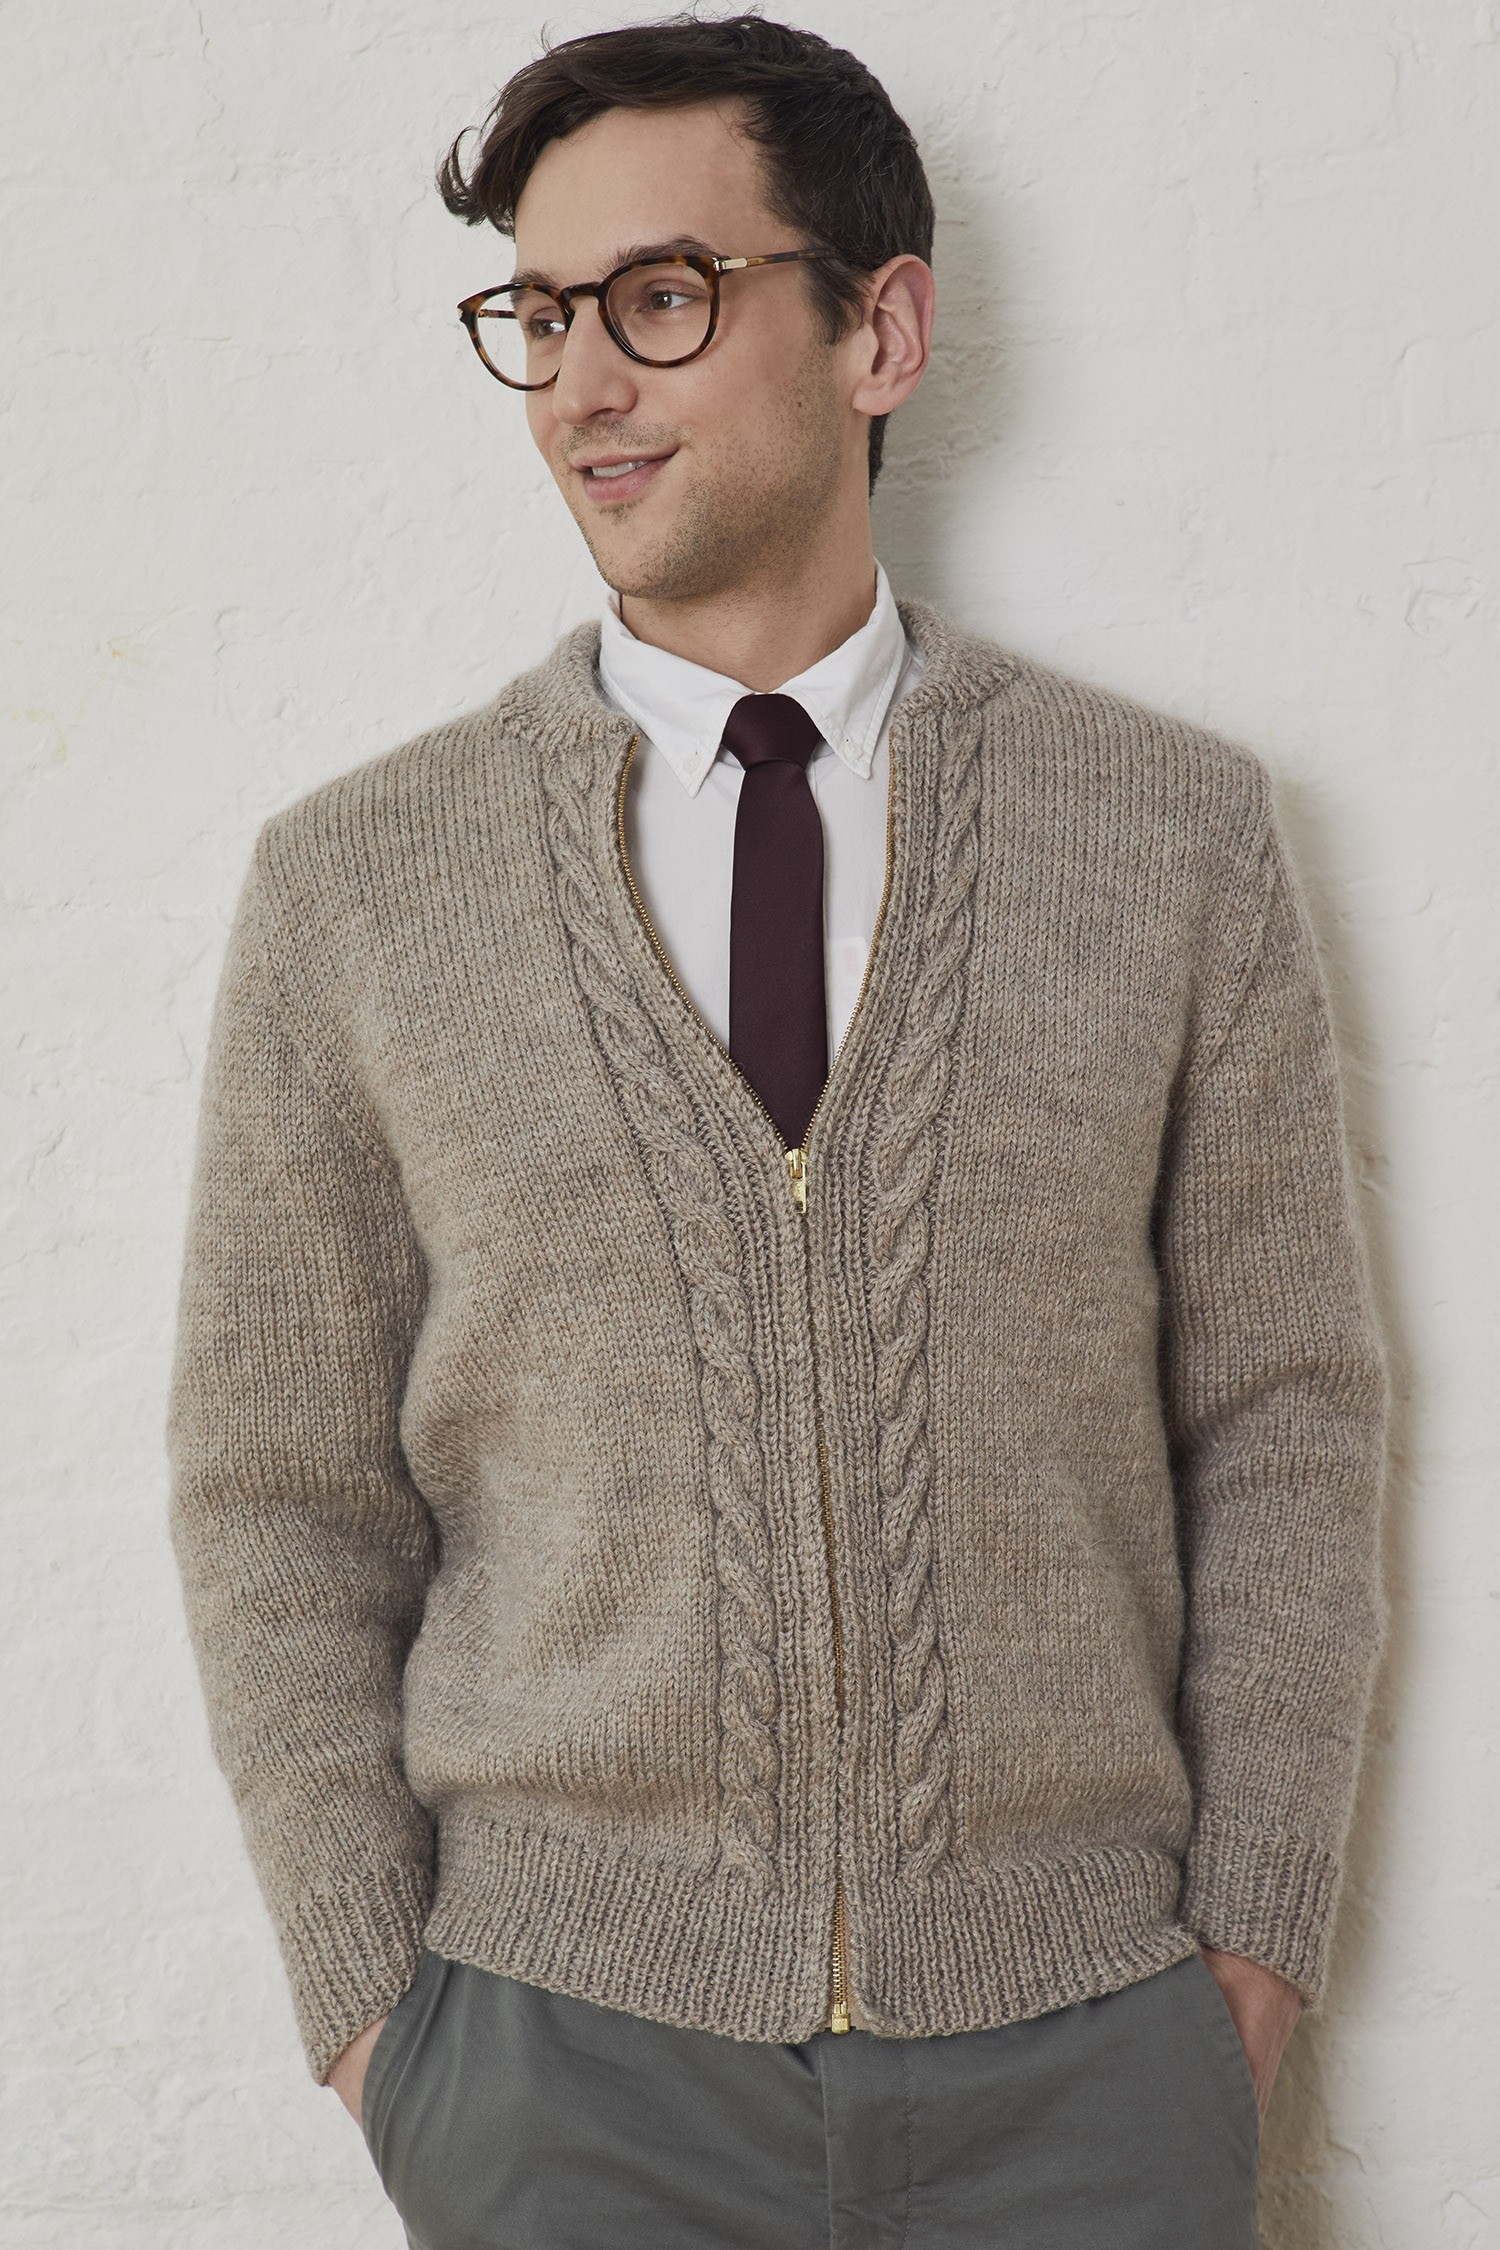 Easy knit mens sweater pattern free downloads patterns Free Knitted